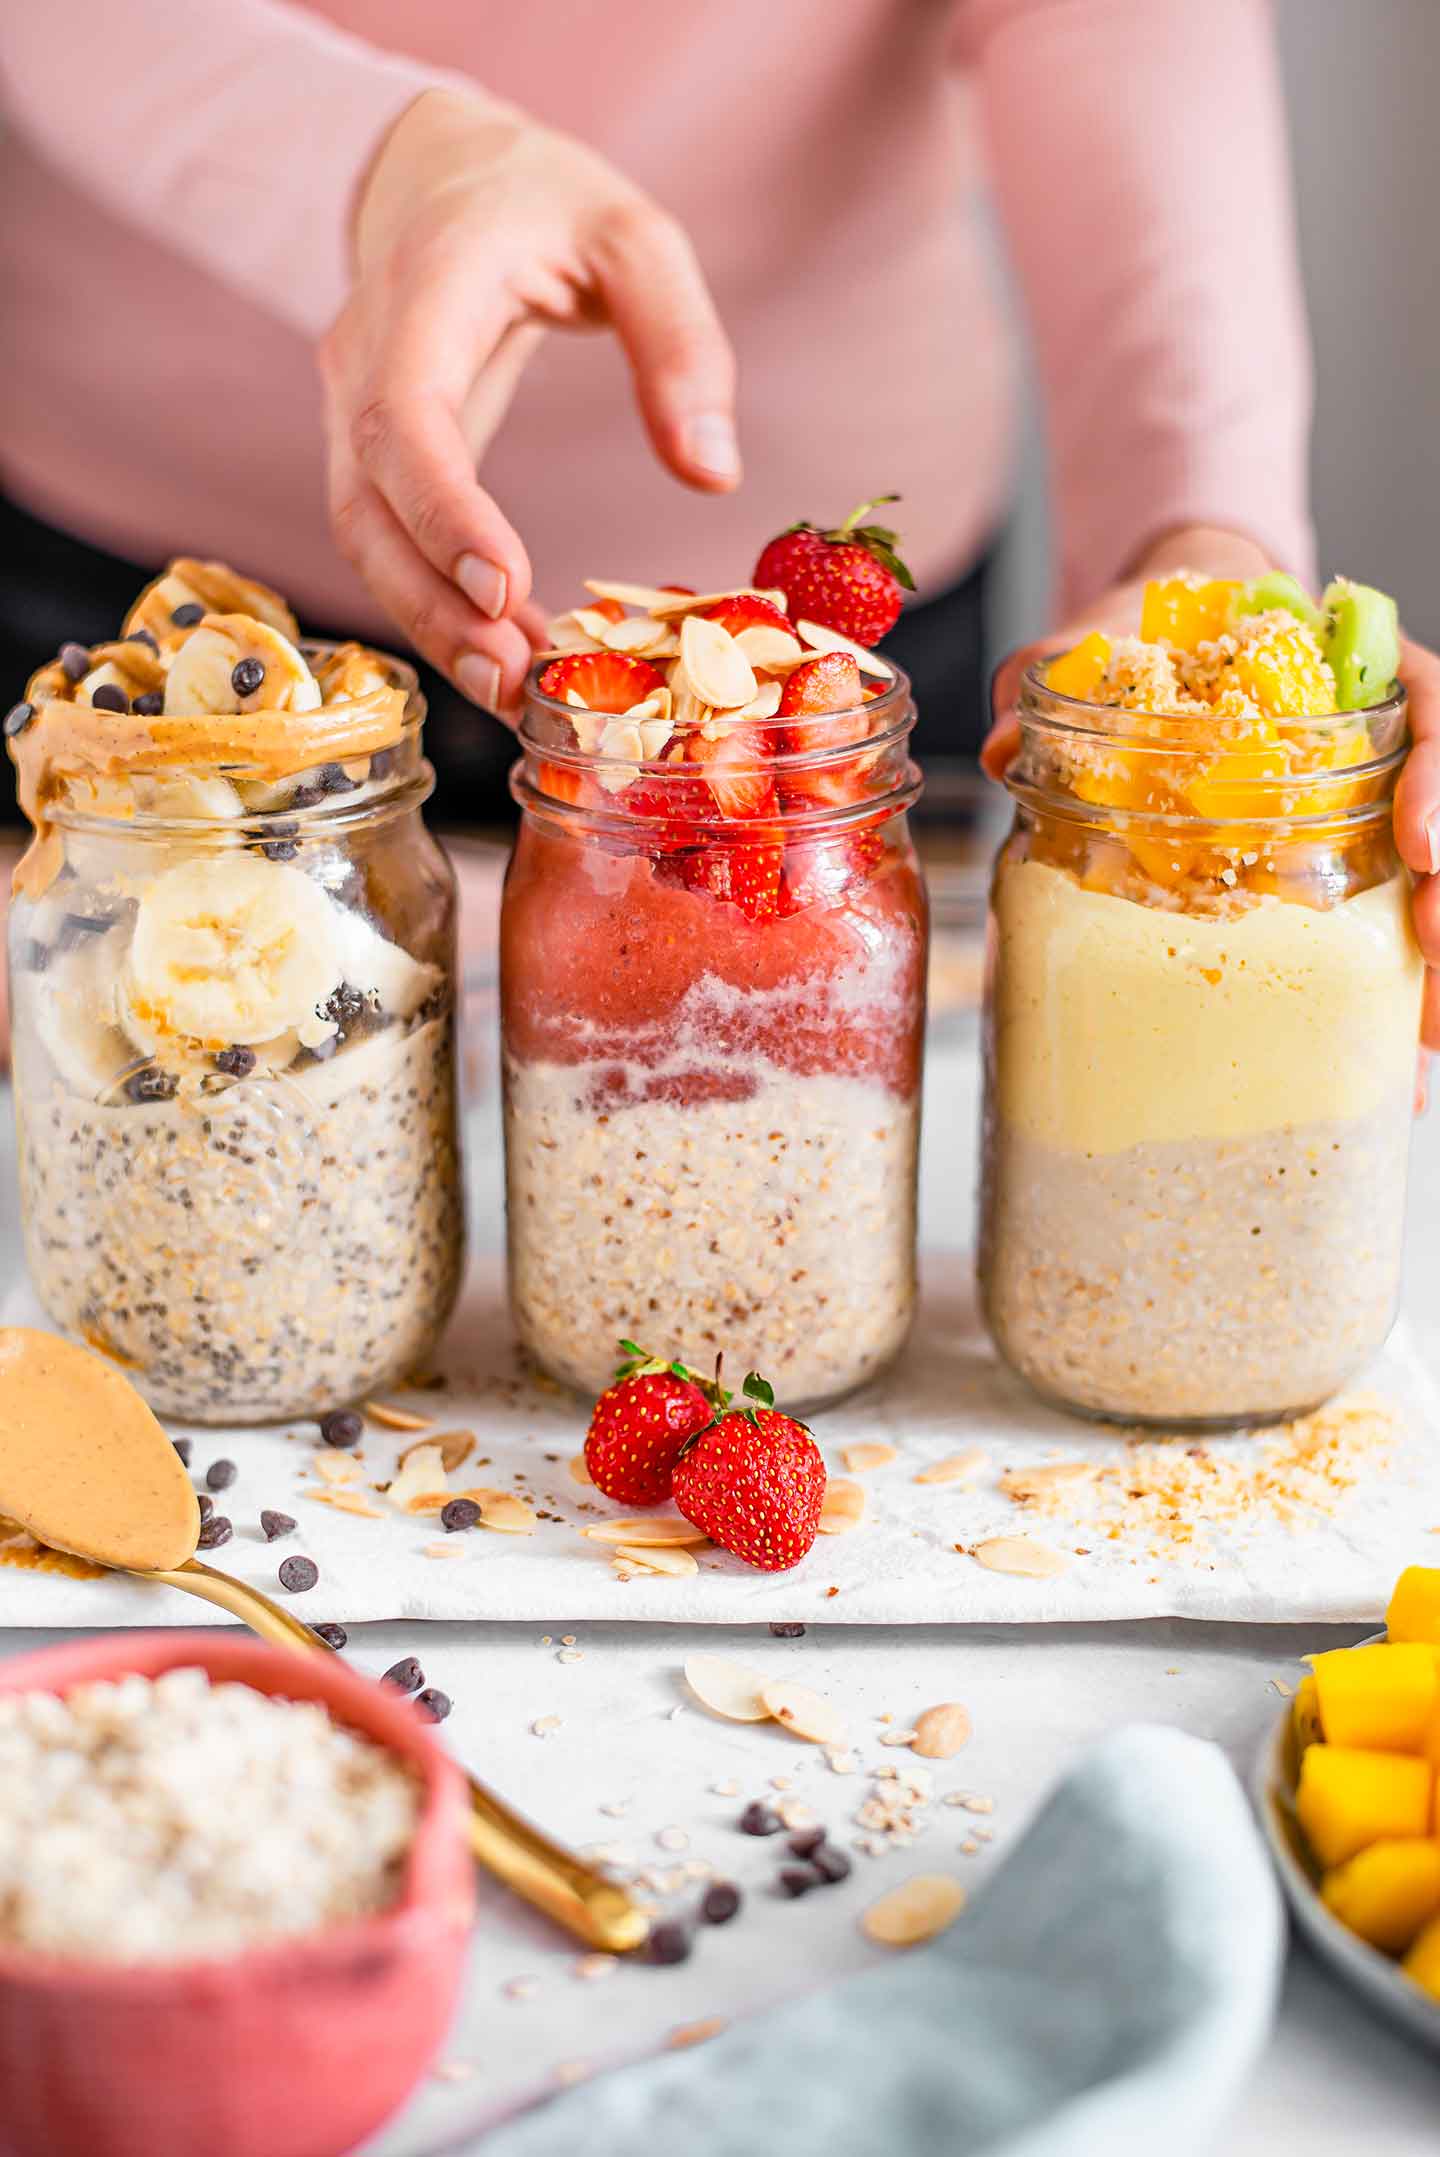 Side view of hands placing three jars of overnight oats on a white tray. One jar is topped with banana, chocolate chips, and runny peanut butter. The next jar is topped with strawberry jam, fresh berries, and toasted almonds. The final jar is topped with mango yogurt, fresh mango, and toasted coconut.